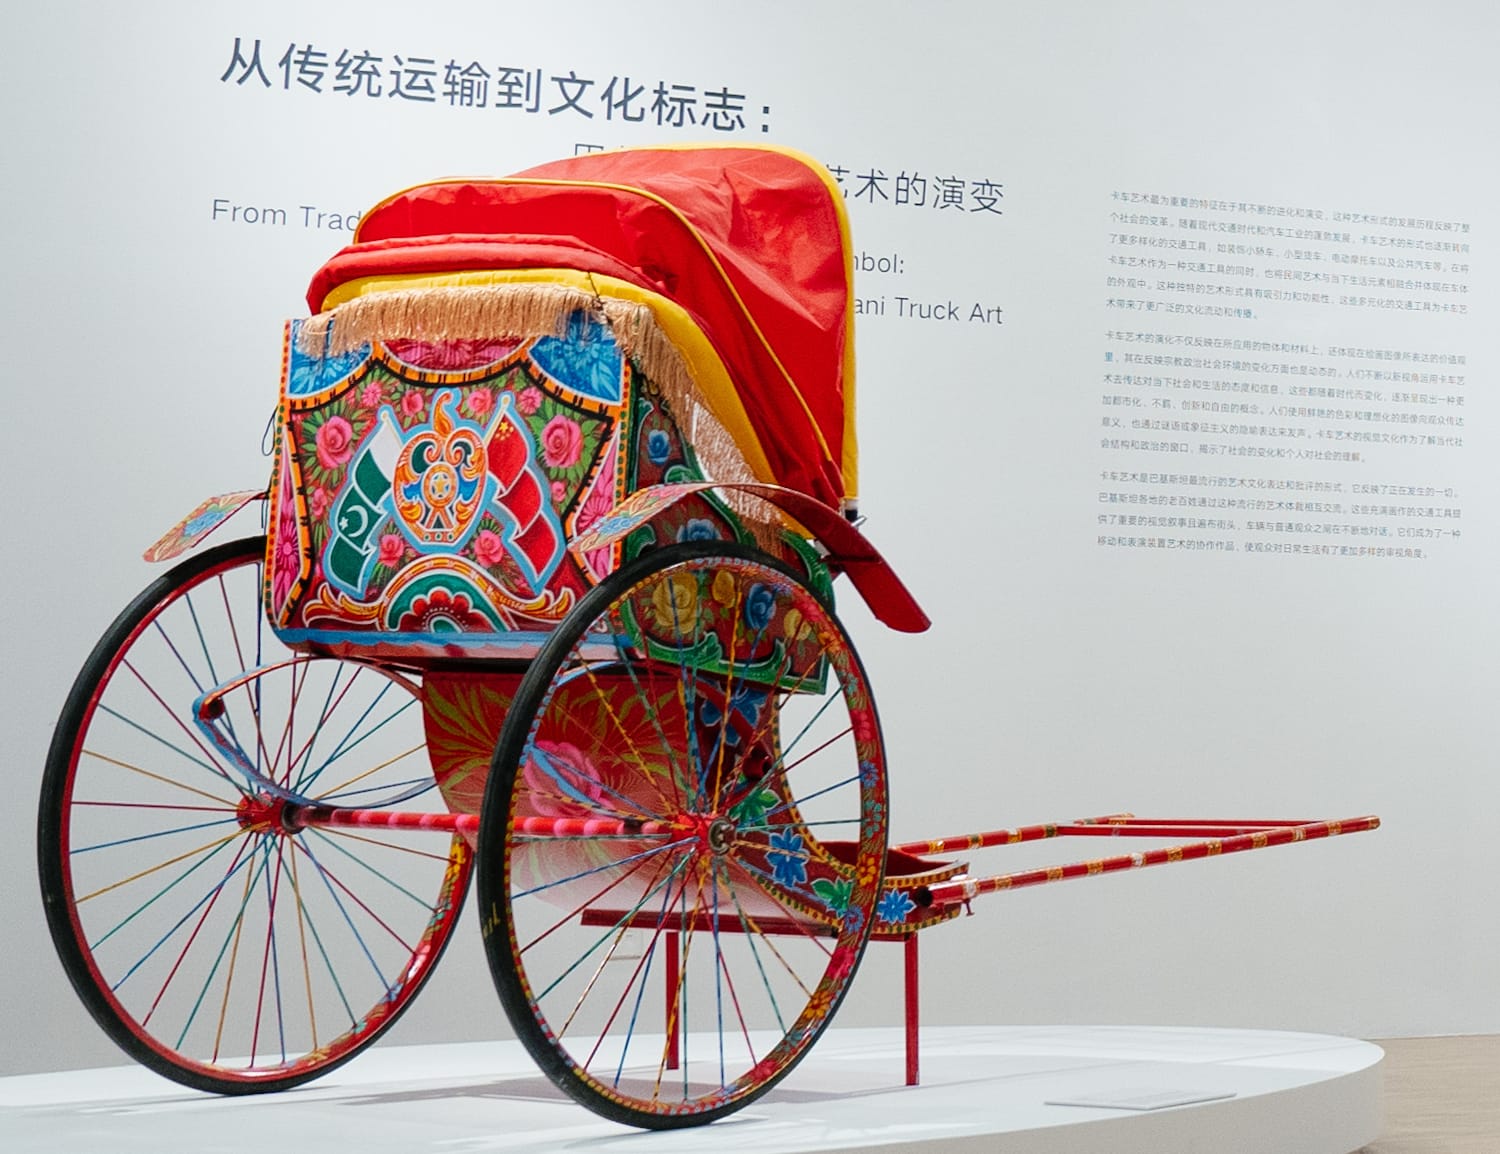 Cart to be pulled by an ox or horse decorated in brightly coloured patterns, illustrations, and motifs.